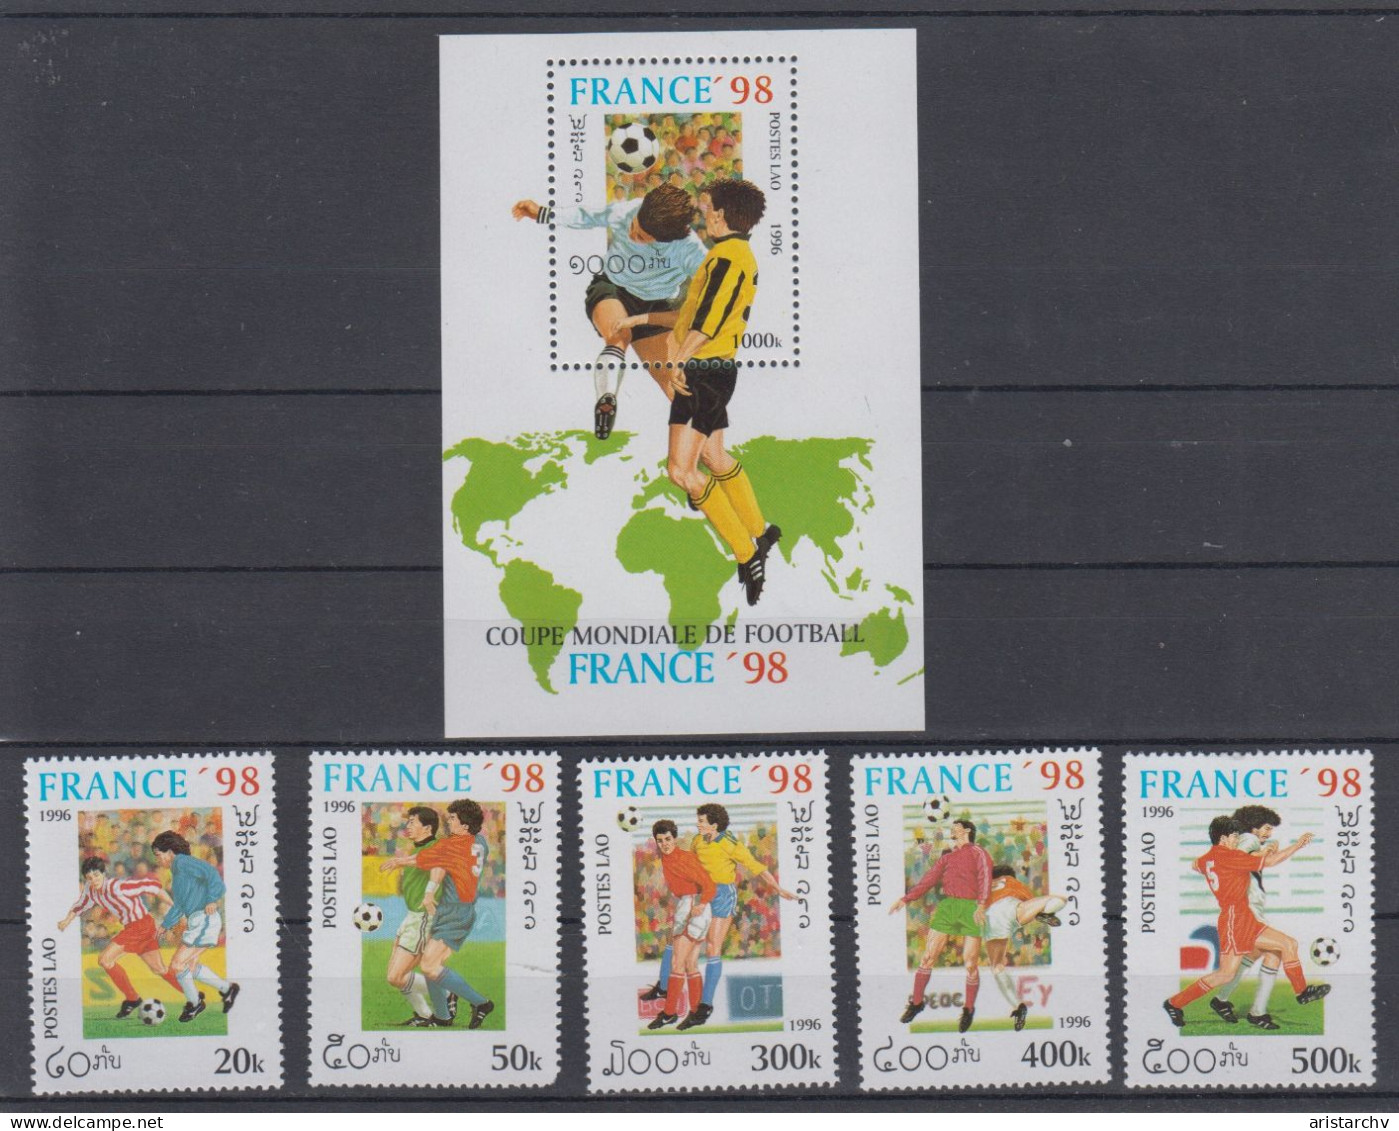 LAOS 1998 FOOTBALL WORLD CUP S/SHEET AND 5 STAMPS - 1998 – Francia